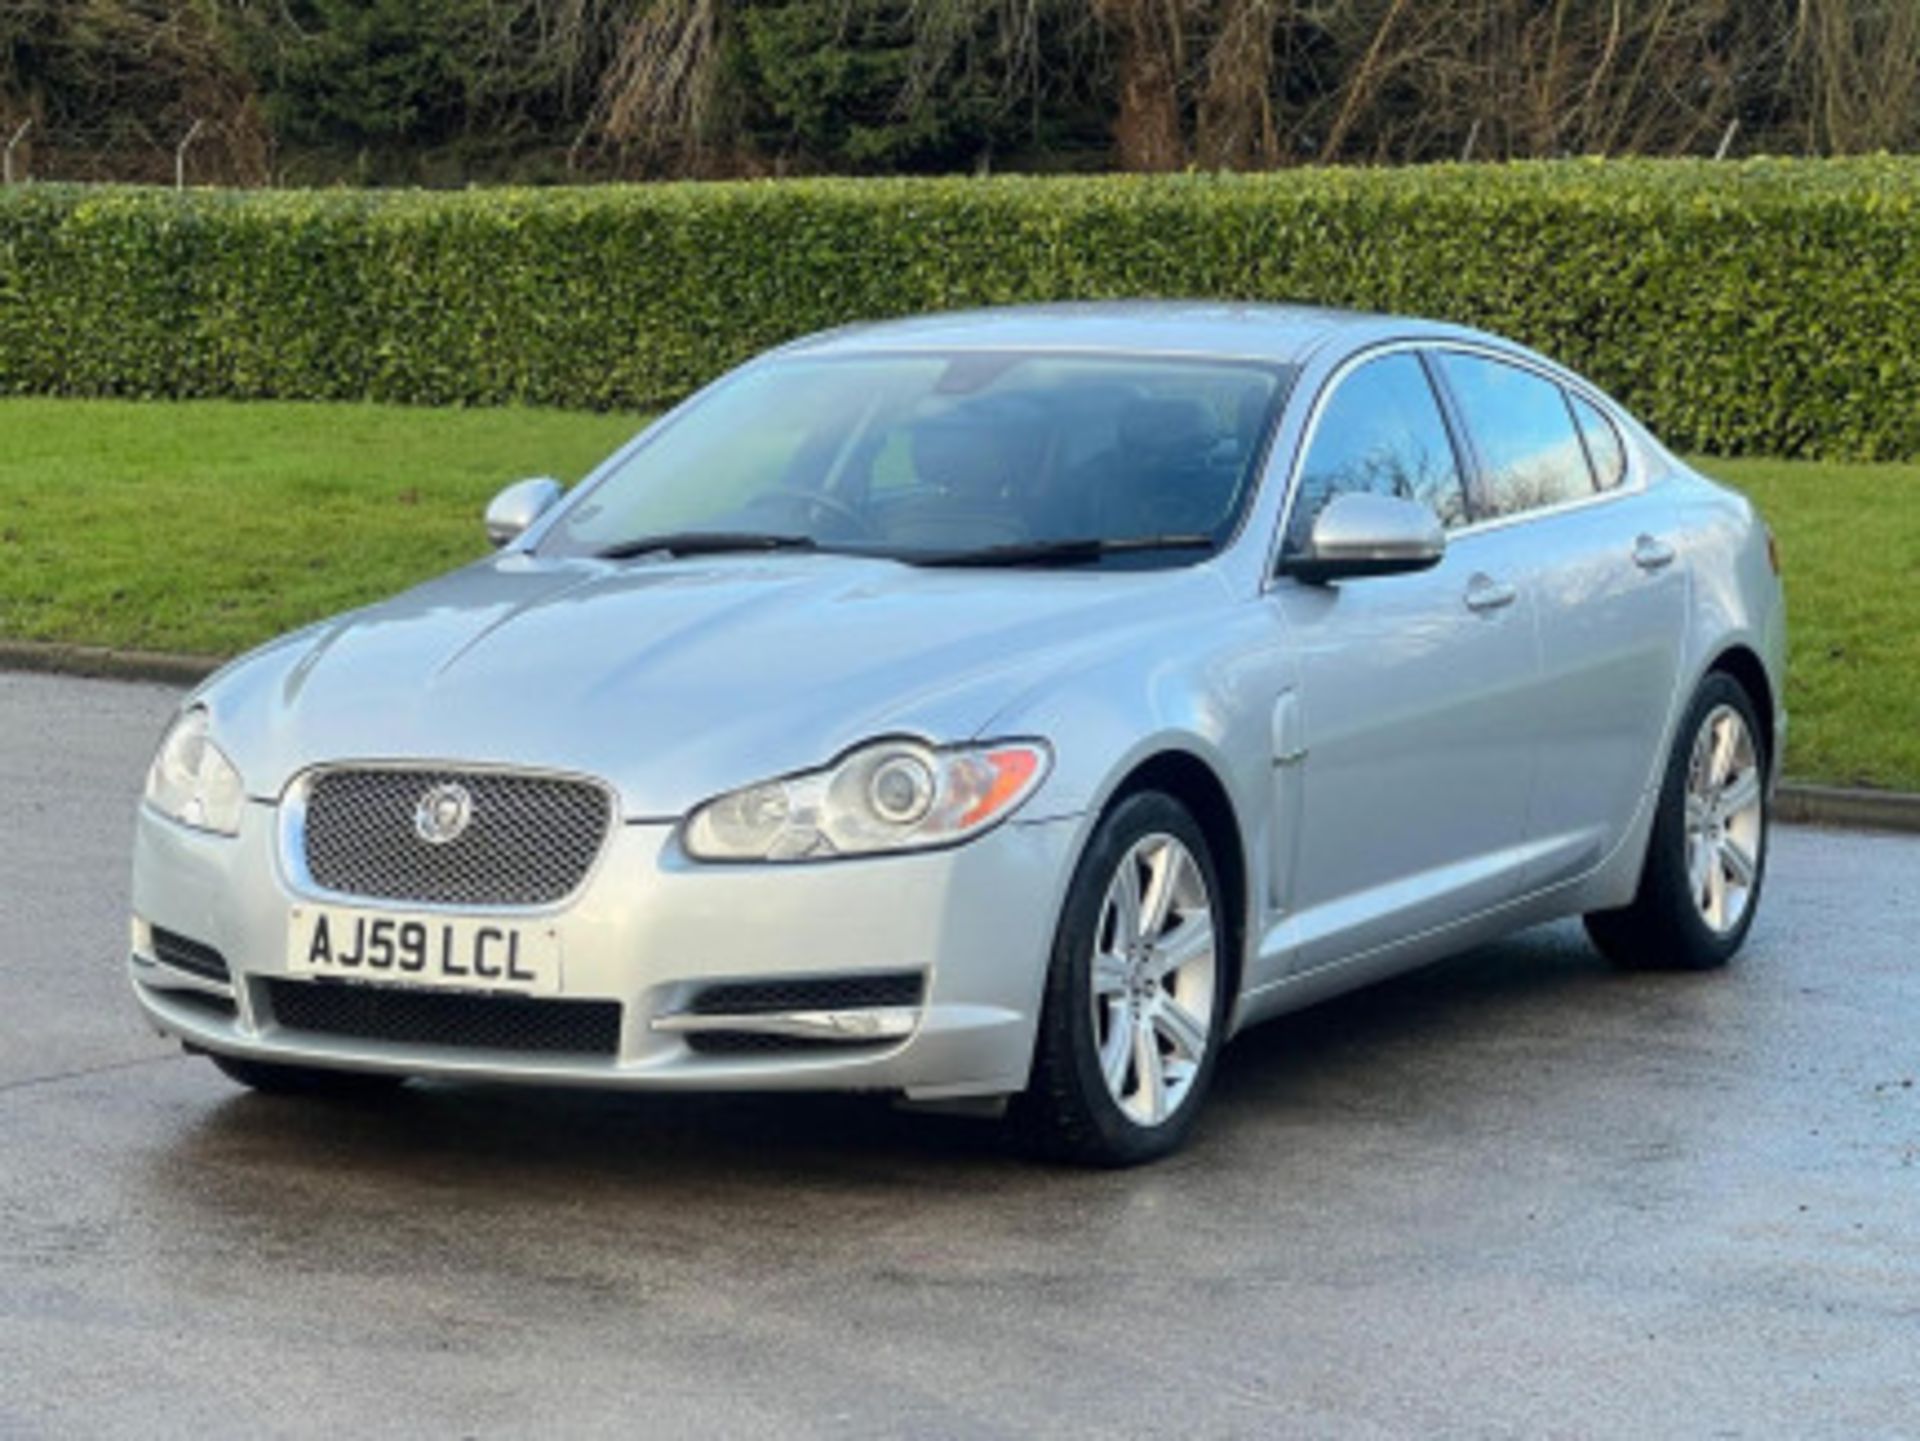 LUXURIOUS JAGUAR XF 3.0D V6 LUXURY 4DR AUTOMATIC SALOON >>--NO VAT ON HAMMER--<< - Image 33 of 80